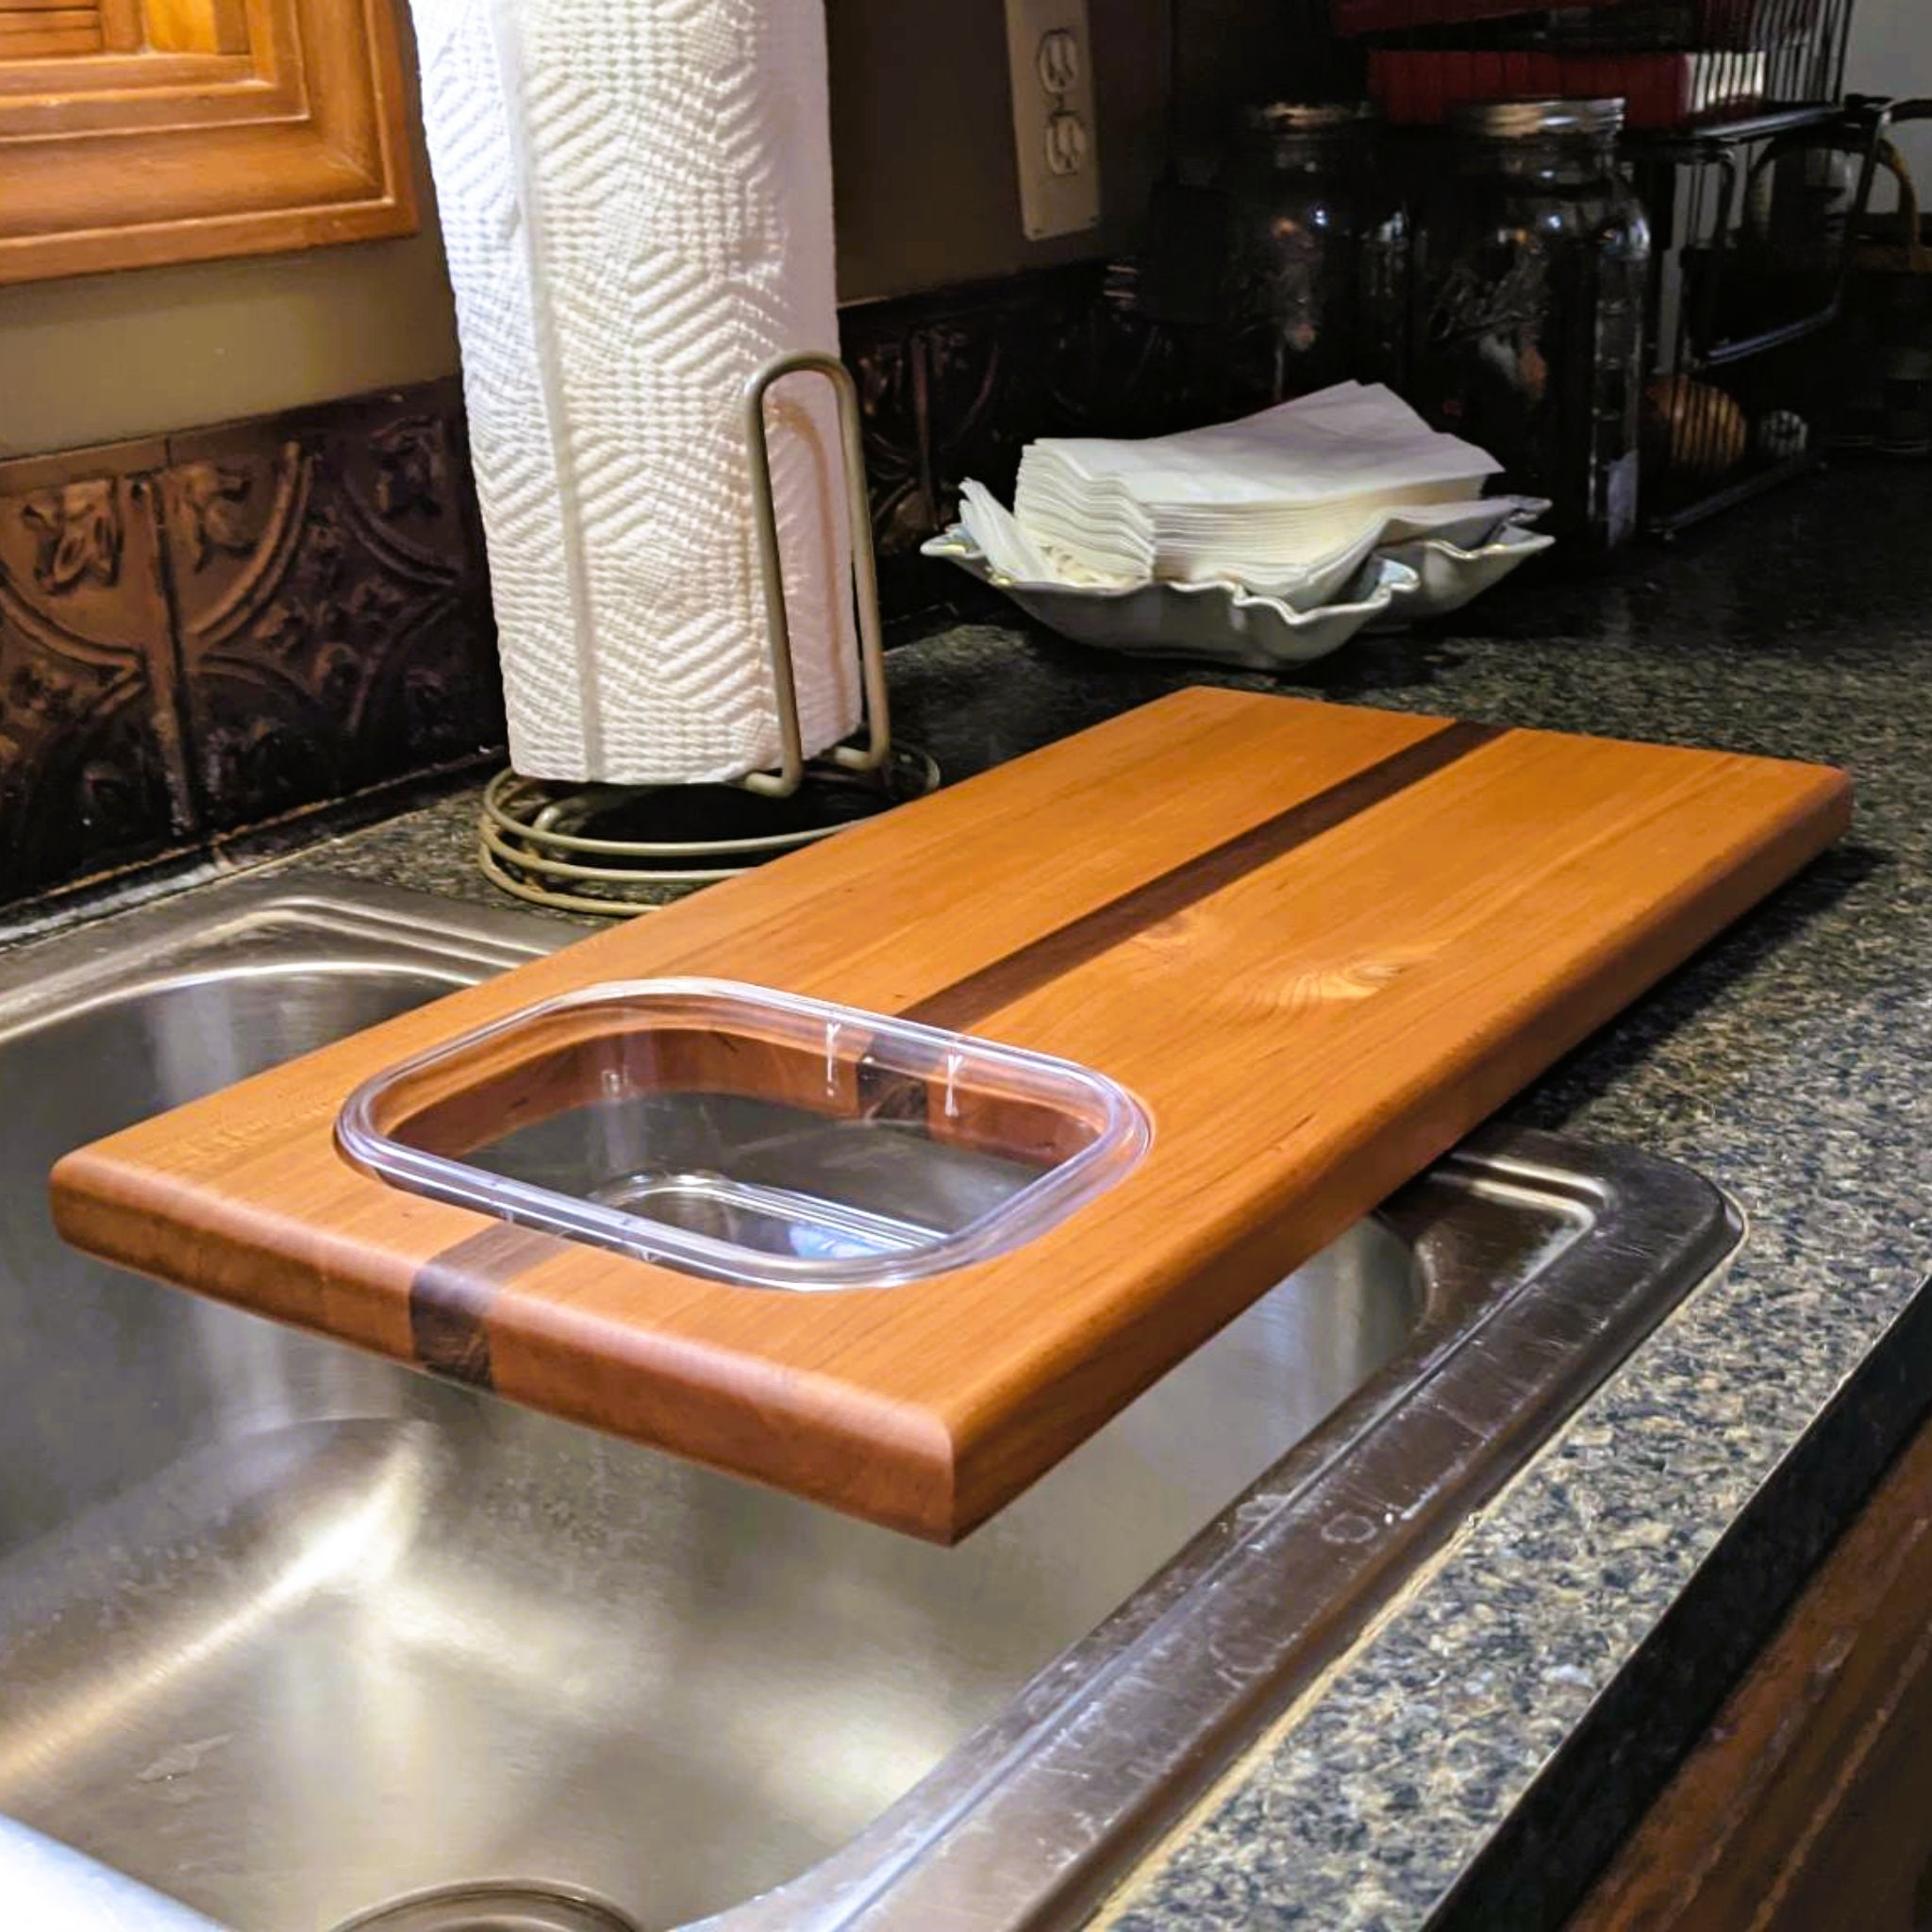 Over-the-sink Cutting Board, Kitchen Sink Strainer, Large Custom Wood  Cutting Board, Sink Cover, Couples Gift, Christmas Gift, Chop Board 